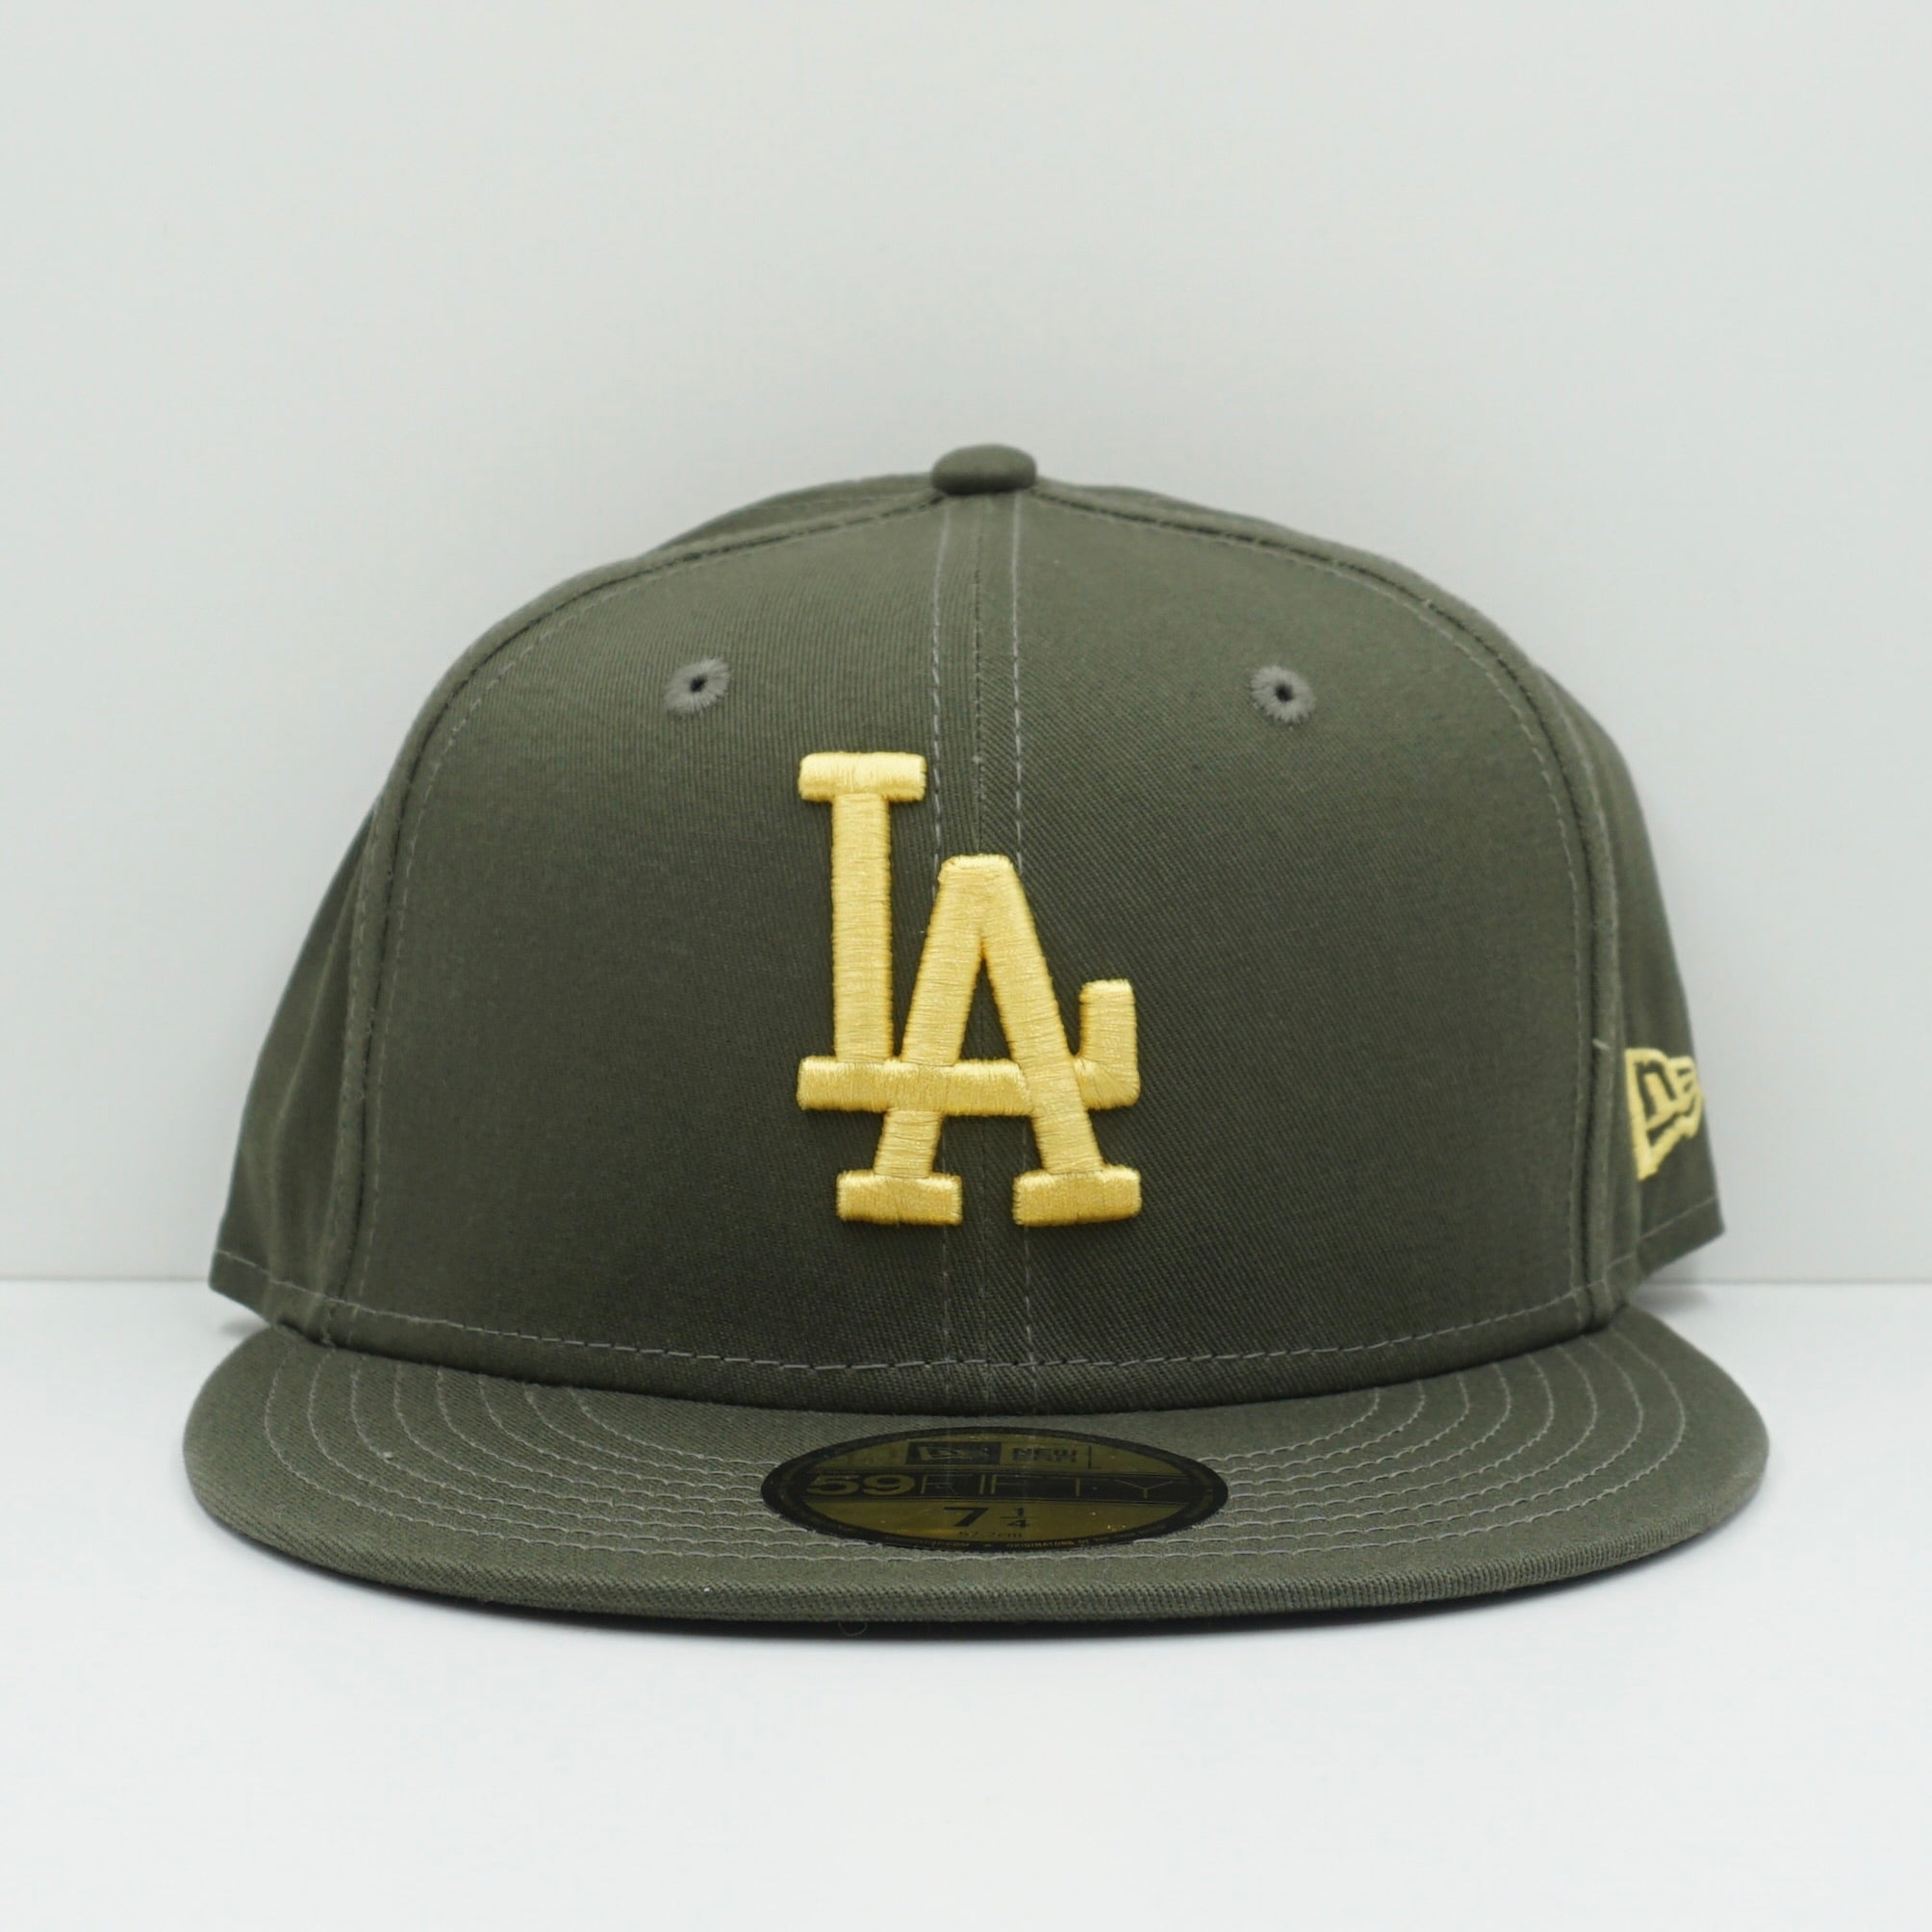 New Era Los Angeles Dodgers Green/Yellow Fitted Cap